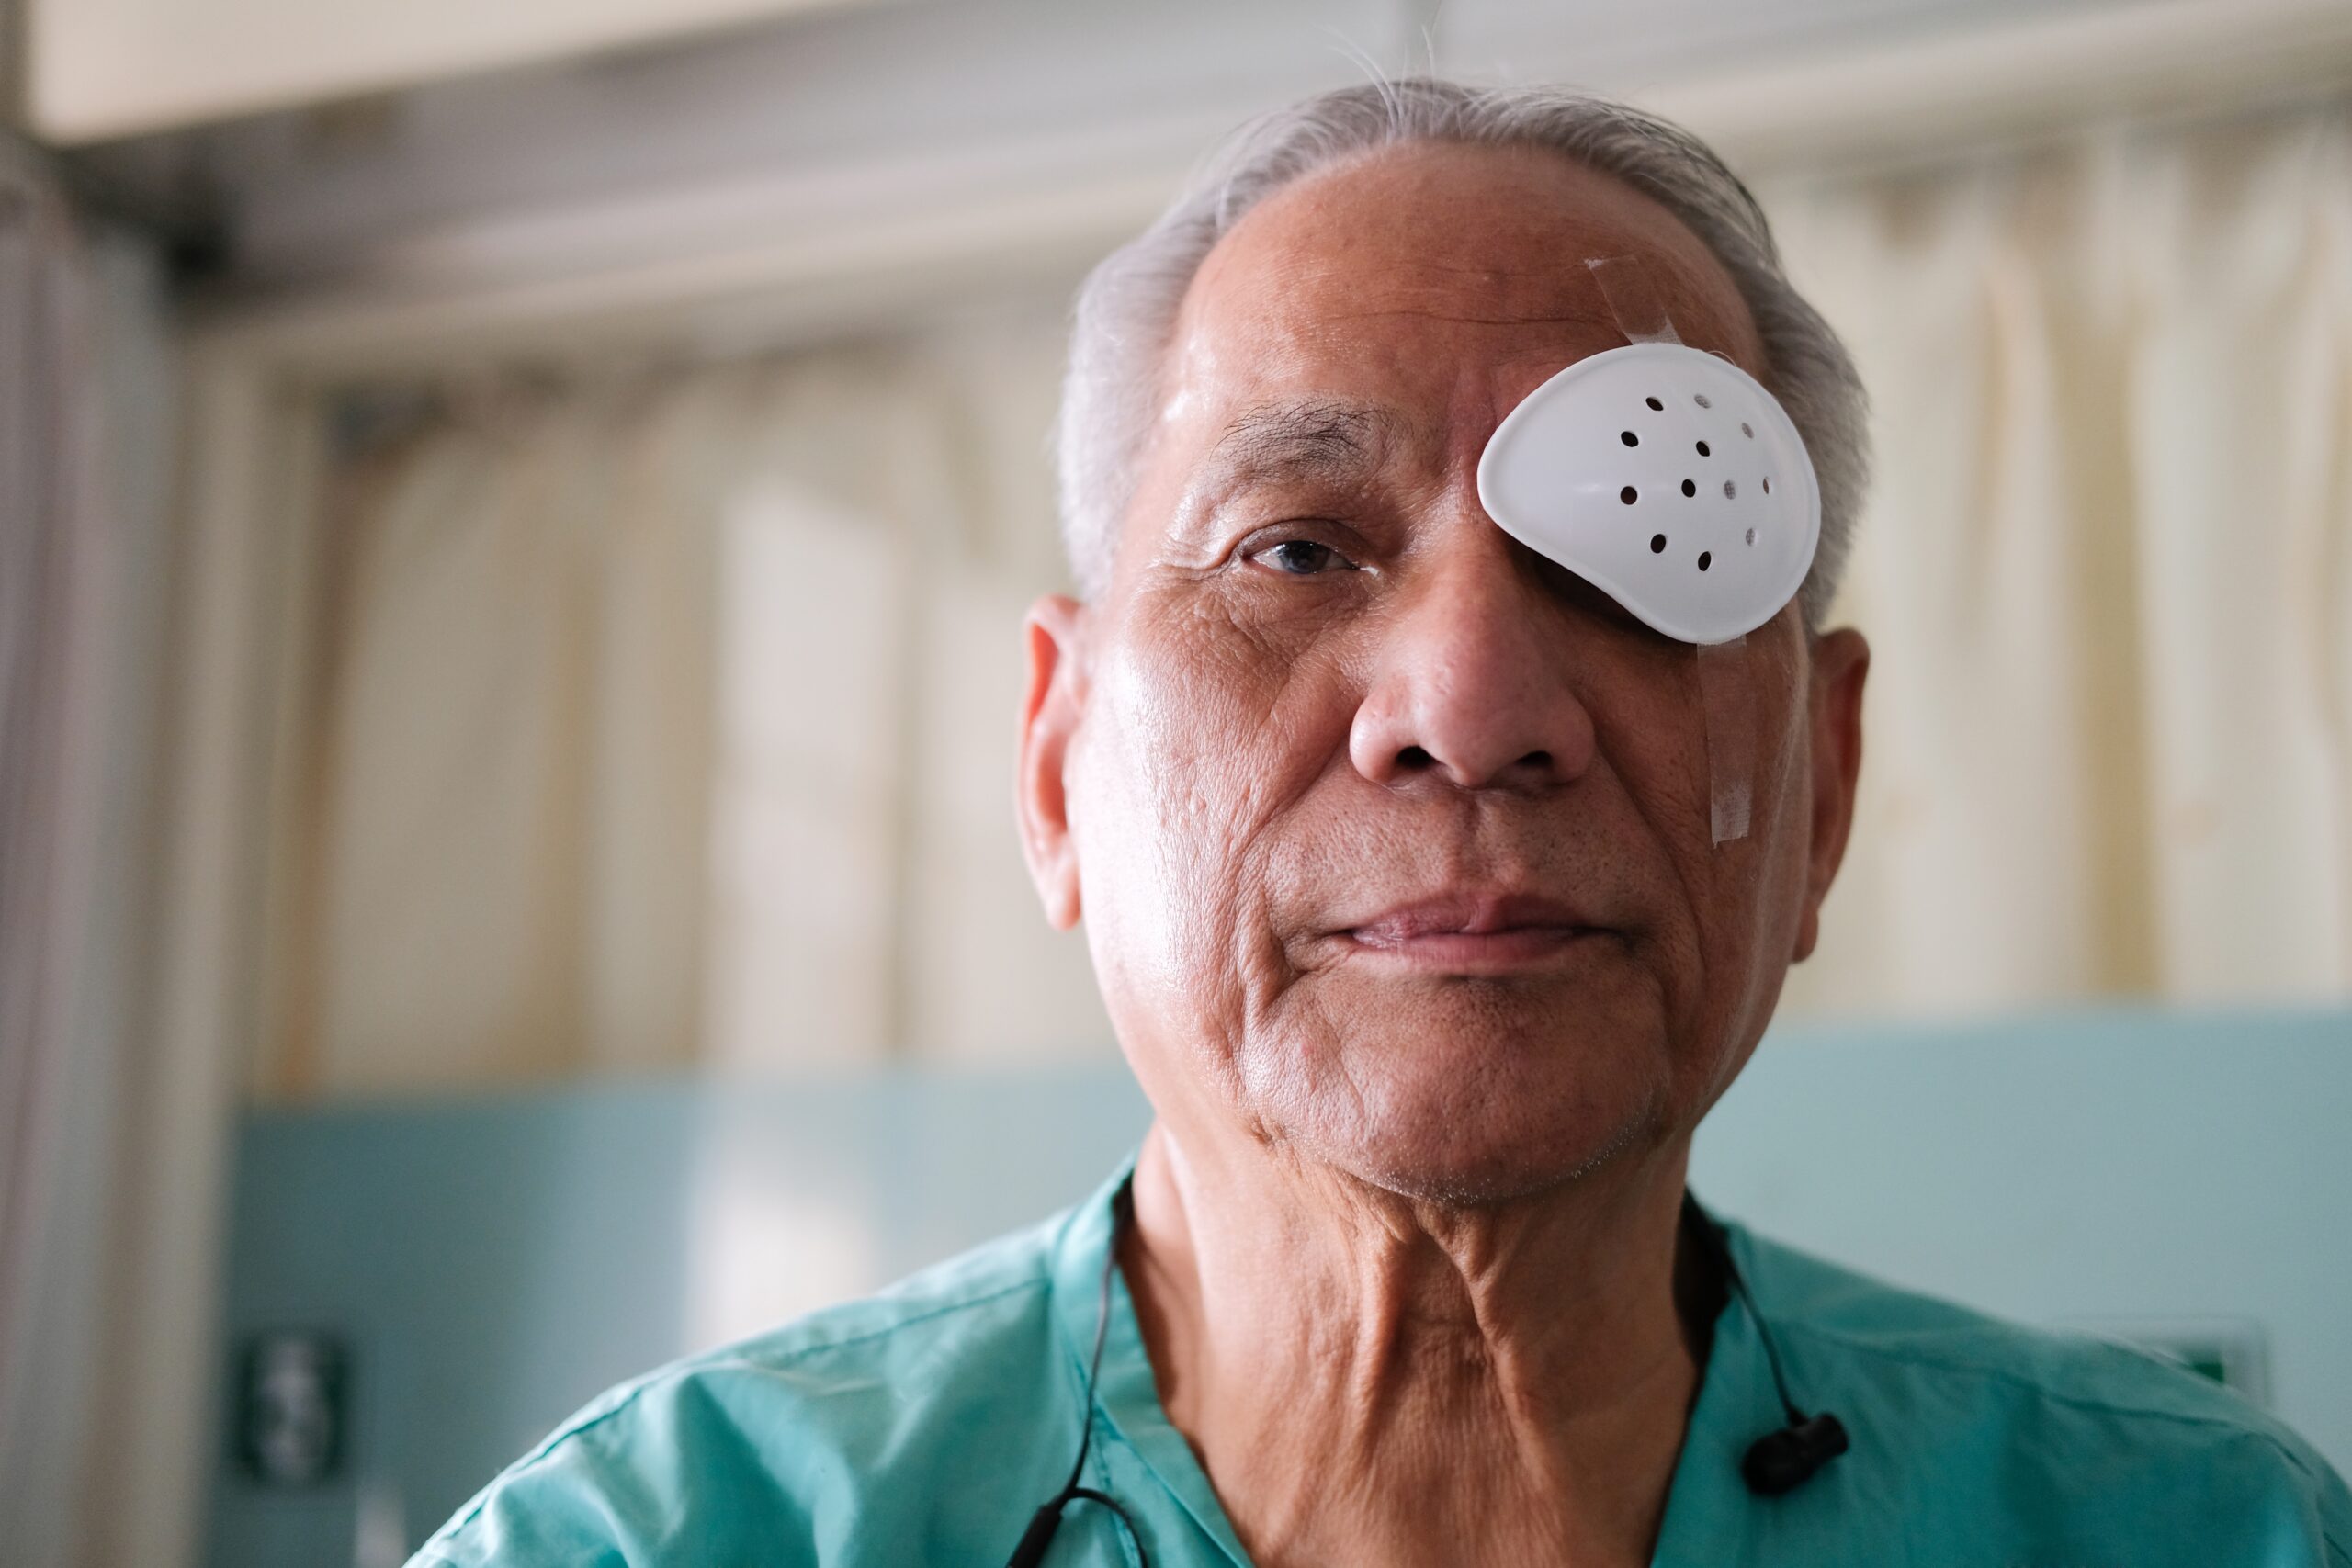 Elderly patient with cataracts scaled